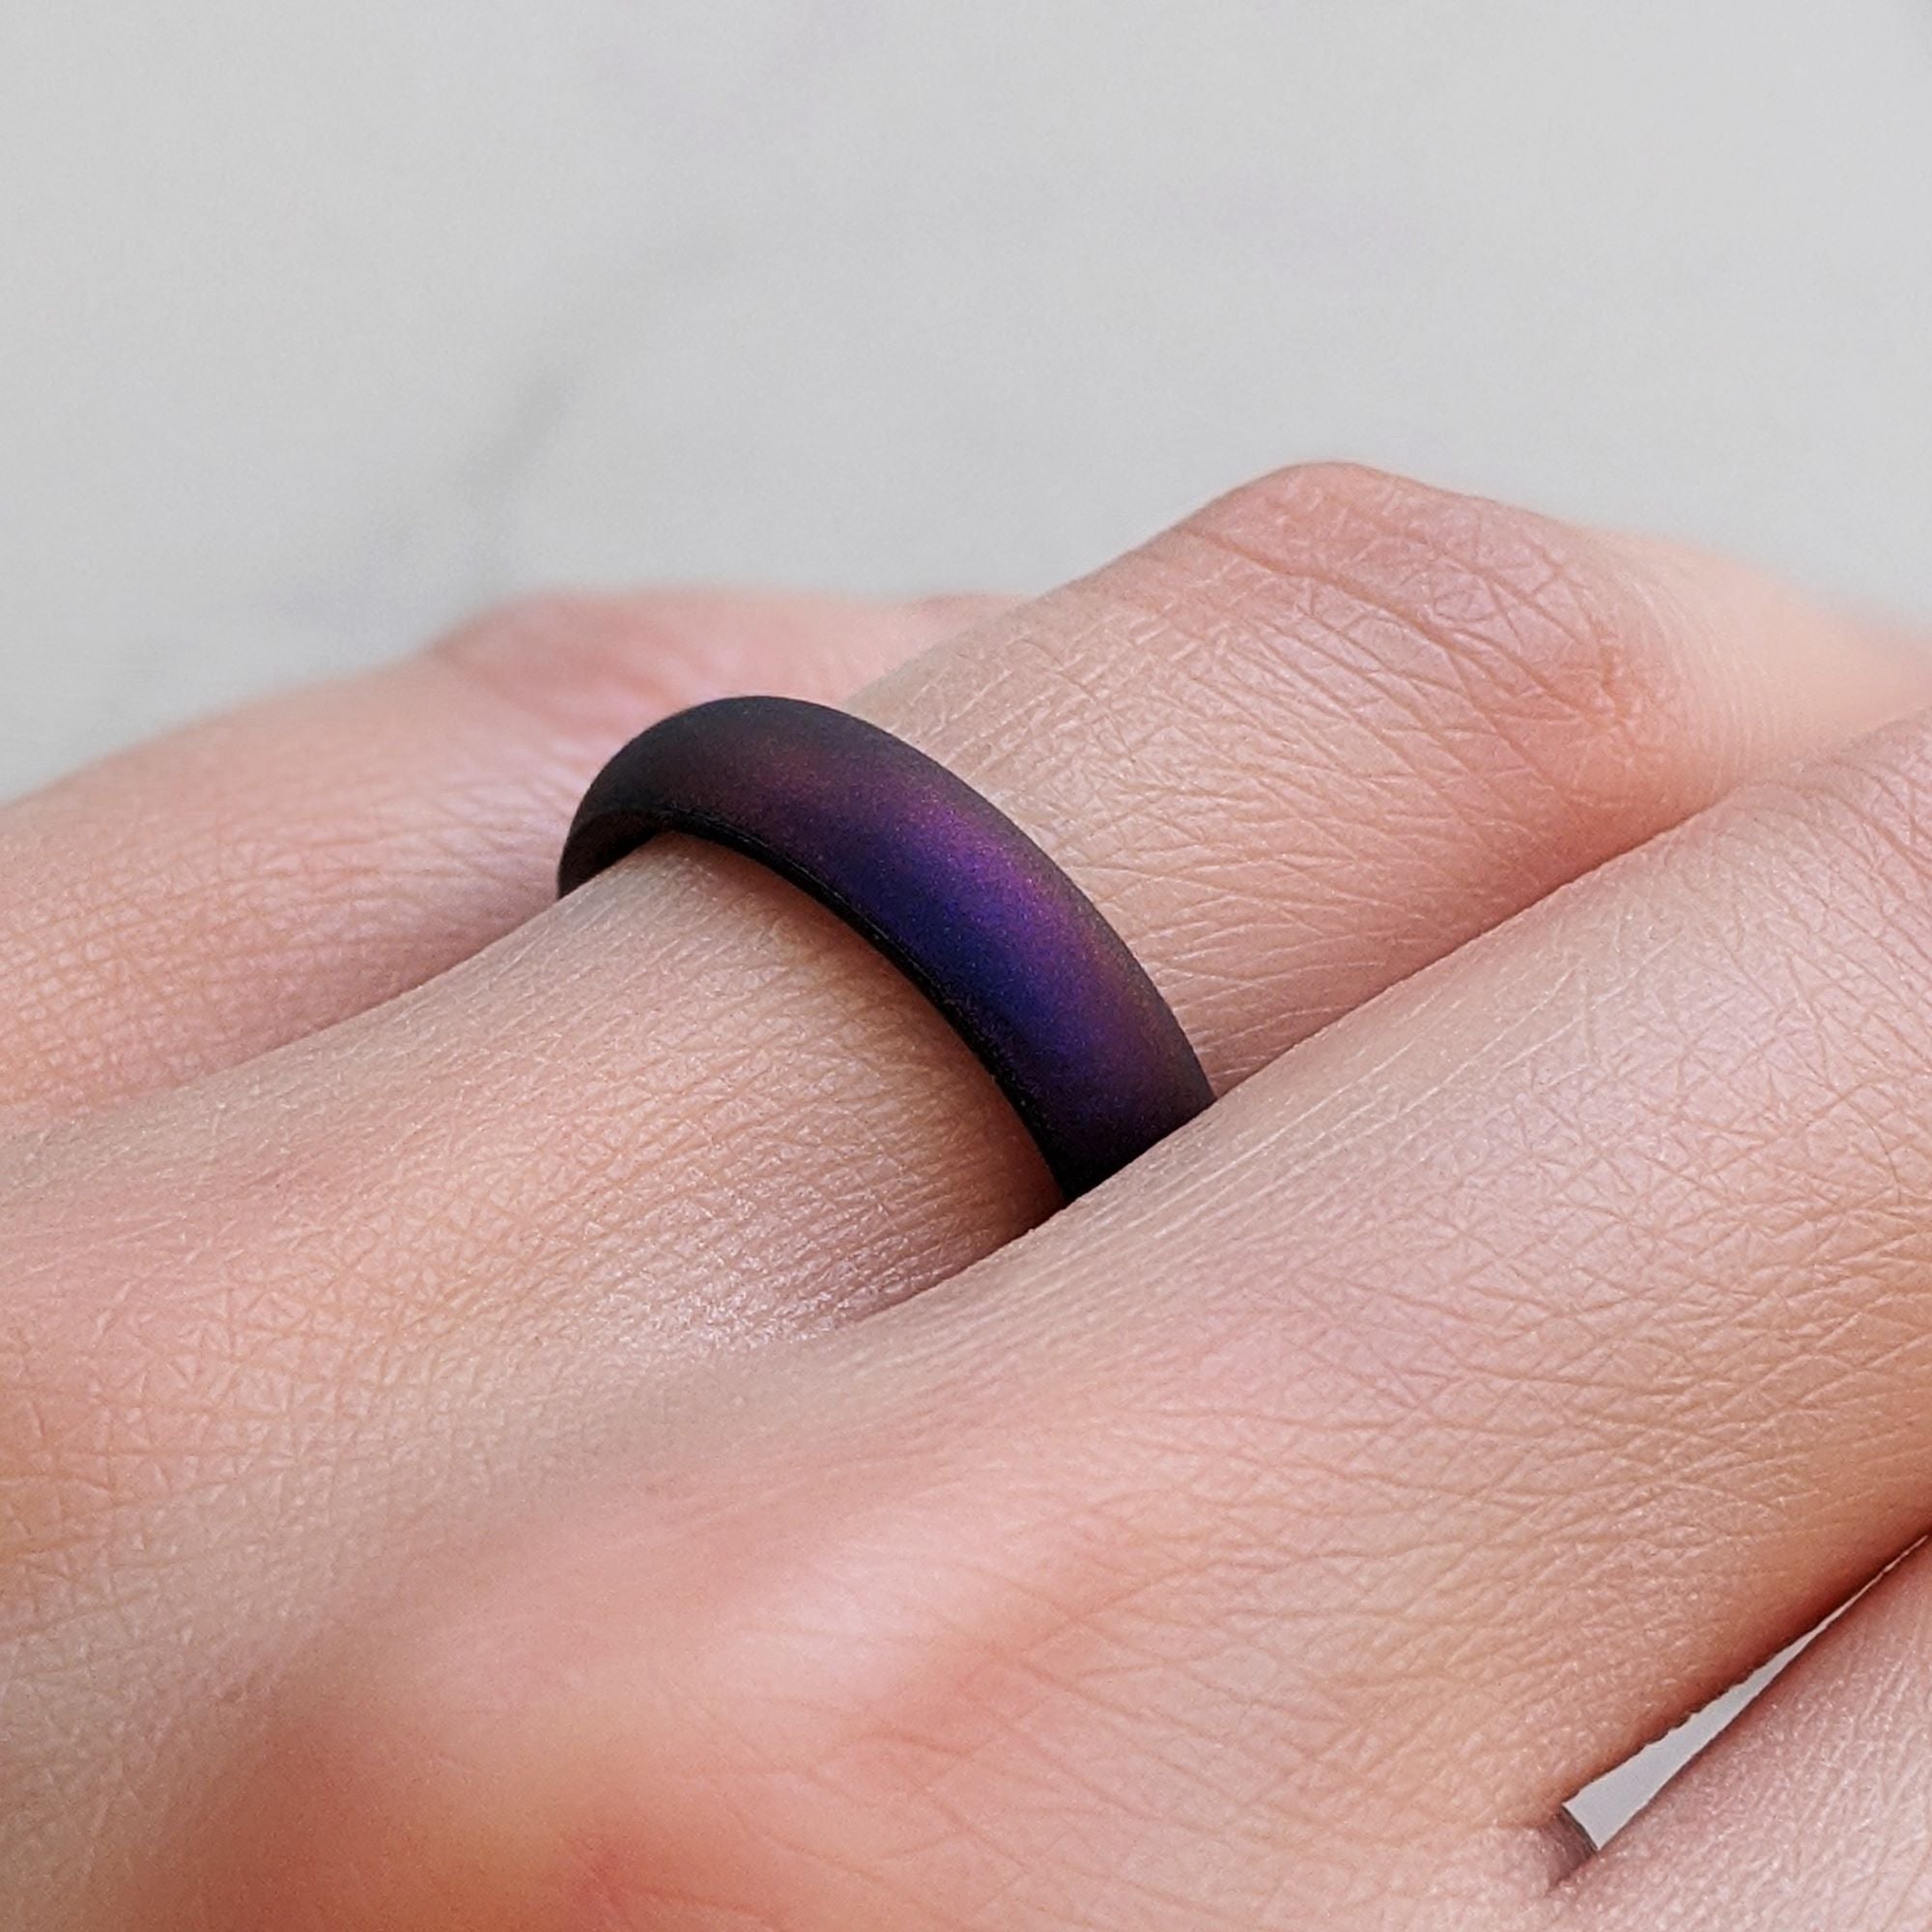 Large Oval Faceted Deep Purple Amethyst Sterling Silver Ring | Boho |  Rocker | Goth | Healing Crystal | Birthstone Ring | Amethyst Ring - Gilded  Bug Jewelry